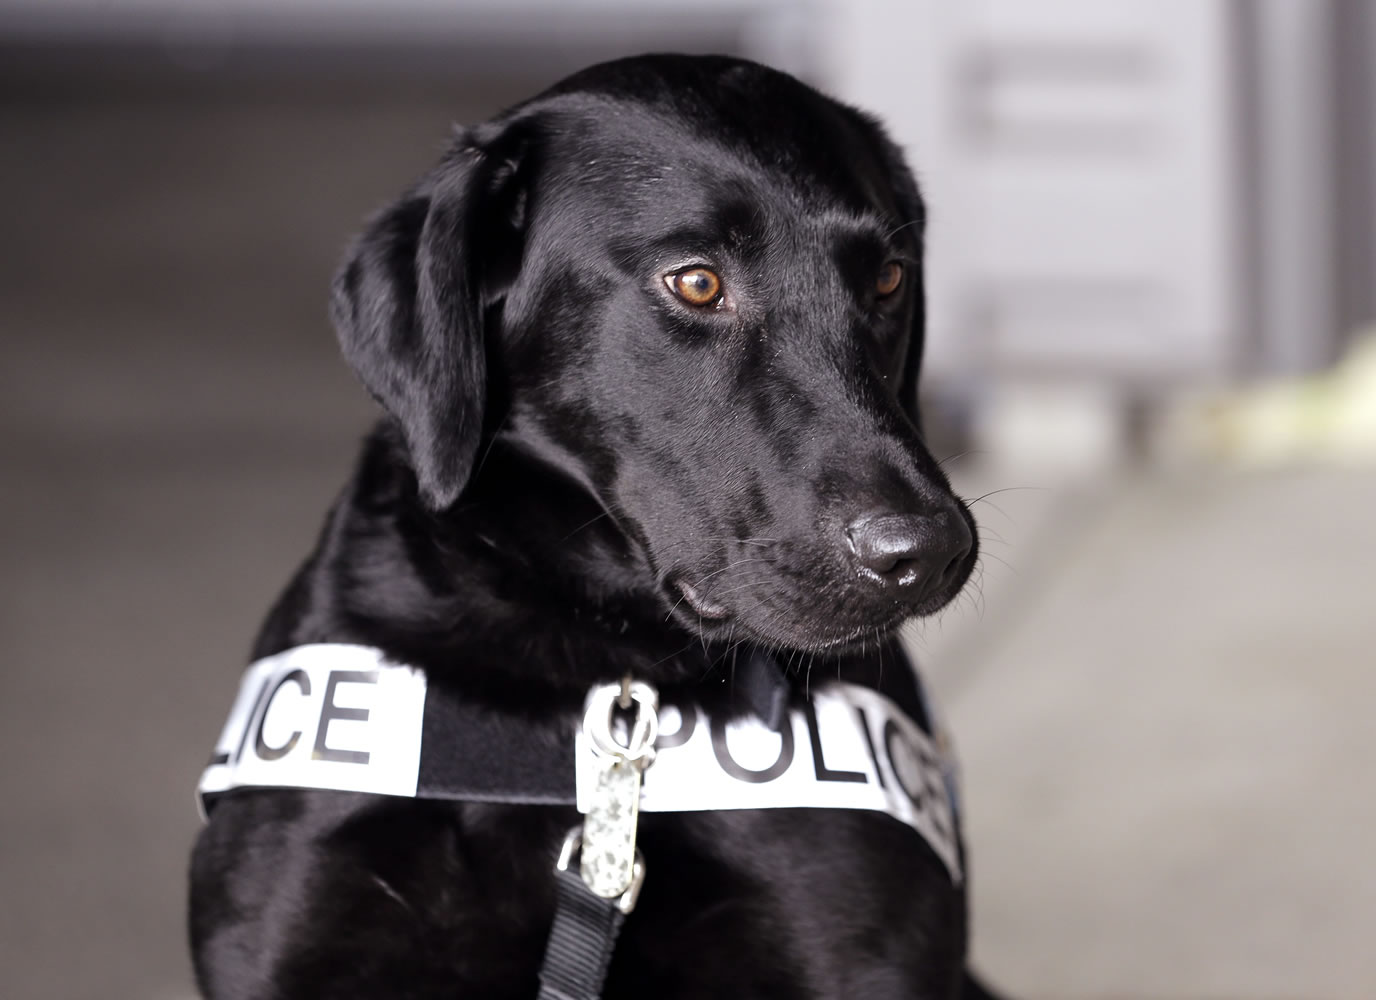 Drug-sniffing police dog Dusty waits Thursday to take part in a training session at the police station in Bremerton.